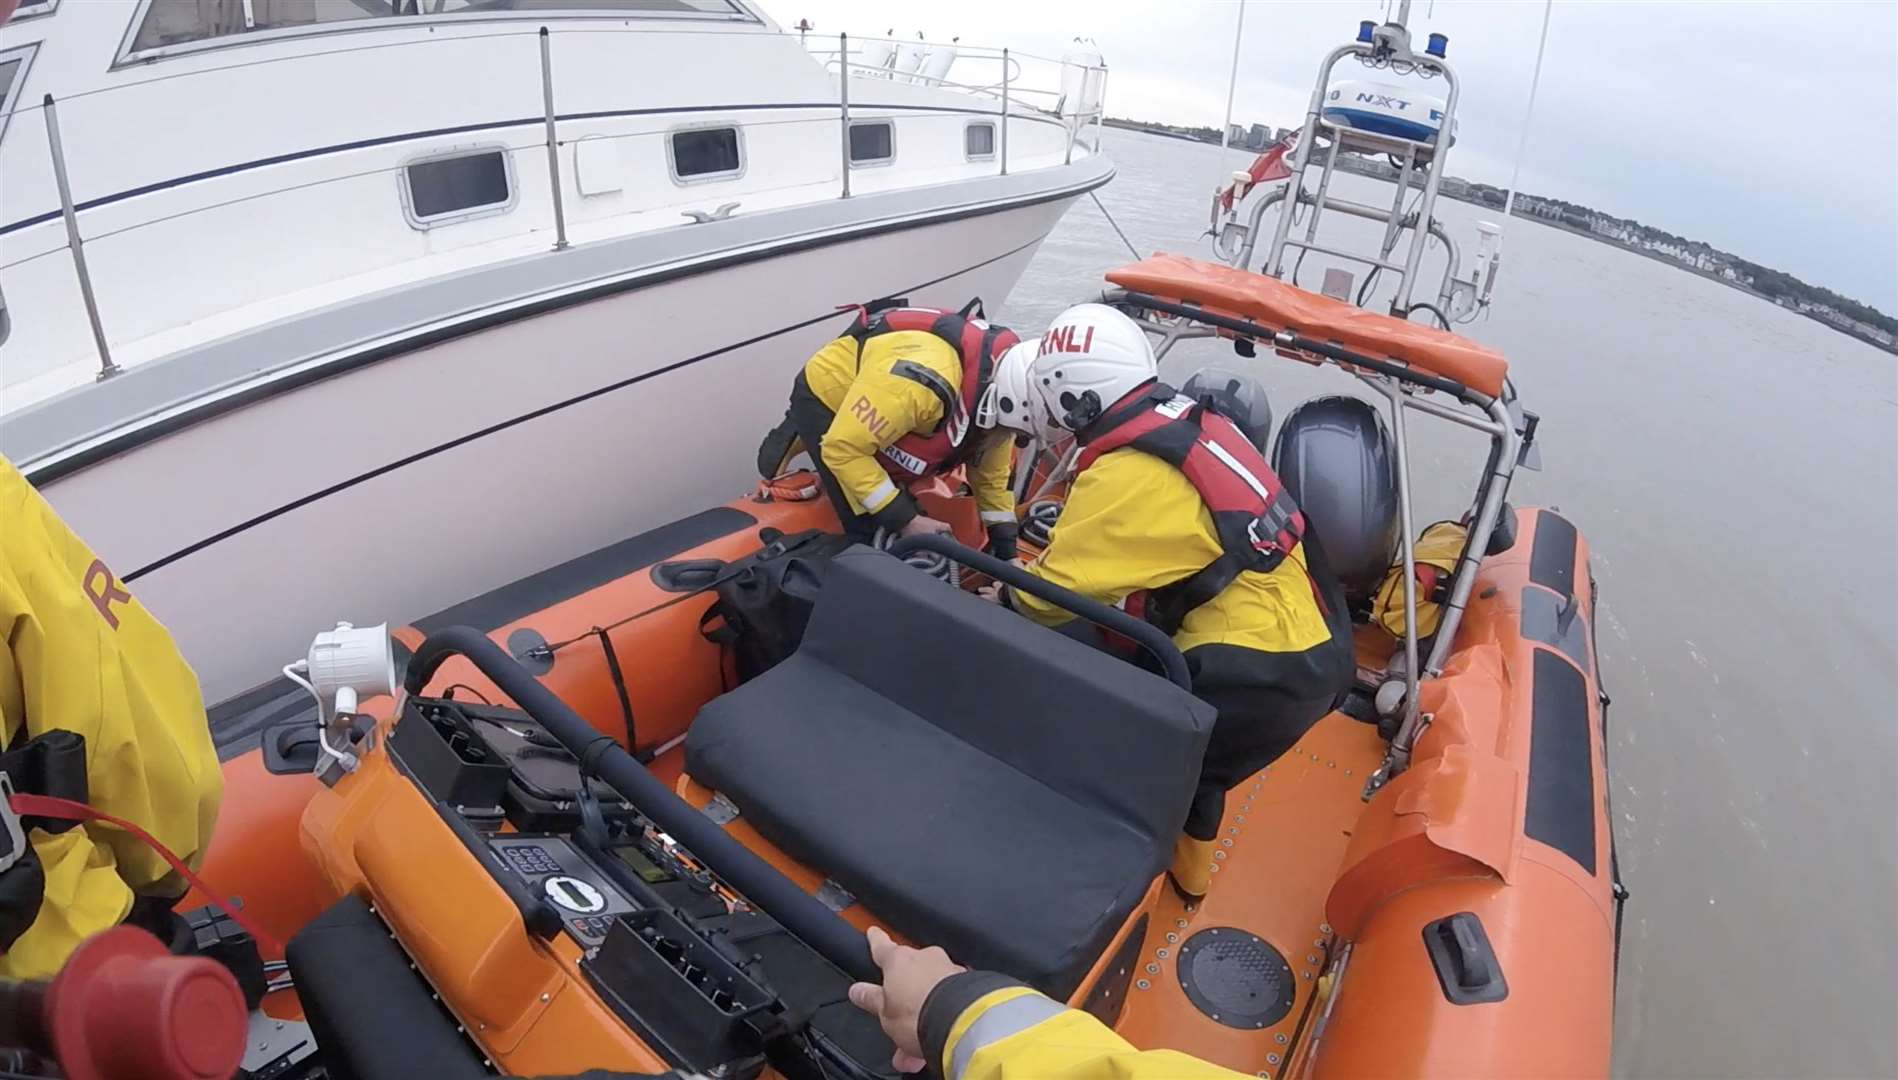 Four crew members from RNLI Gravesend had to be called to assist the vessel. Picture: RNLI